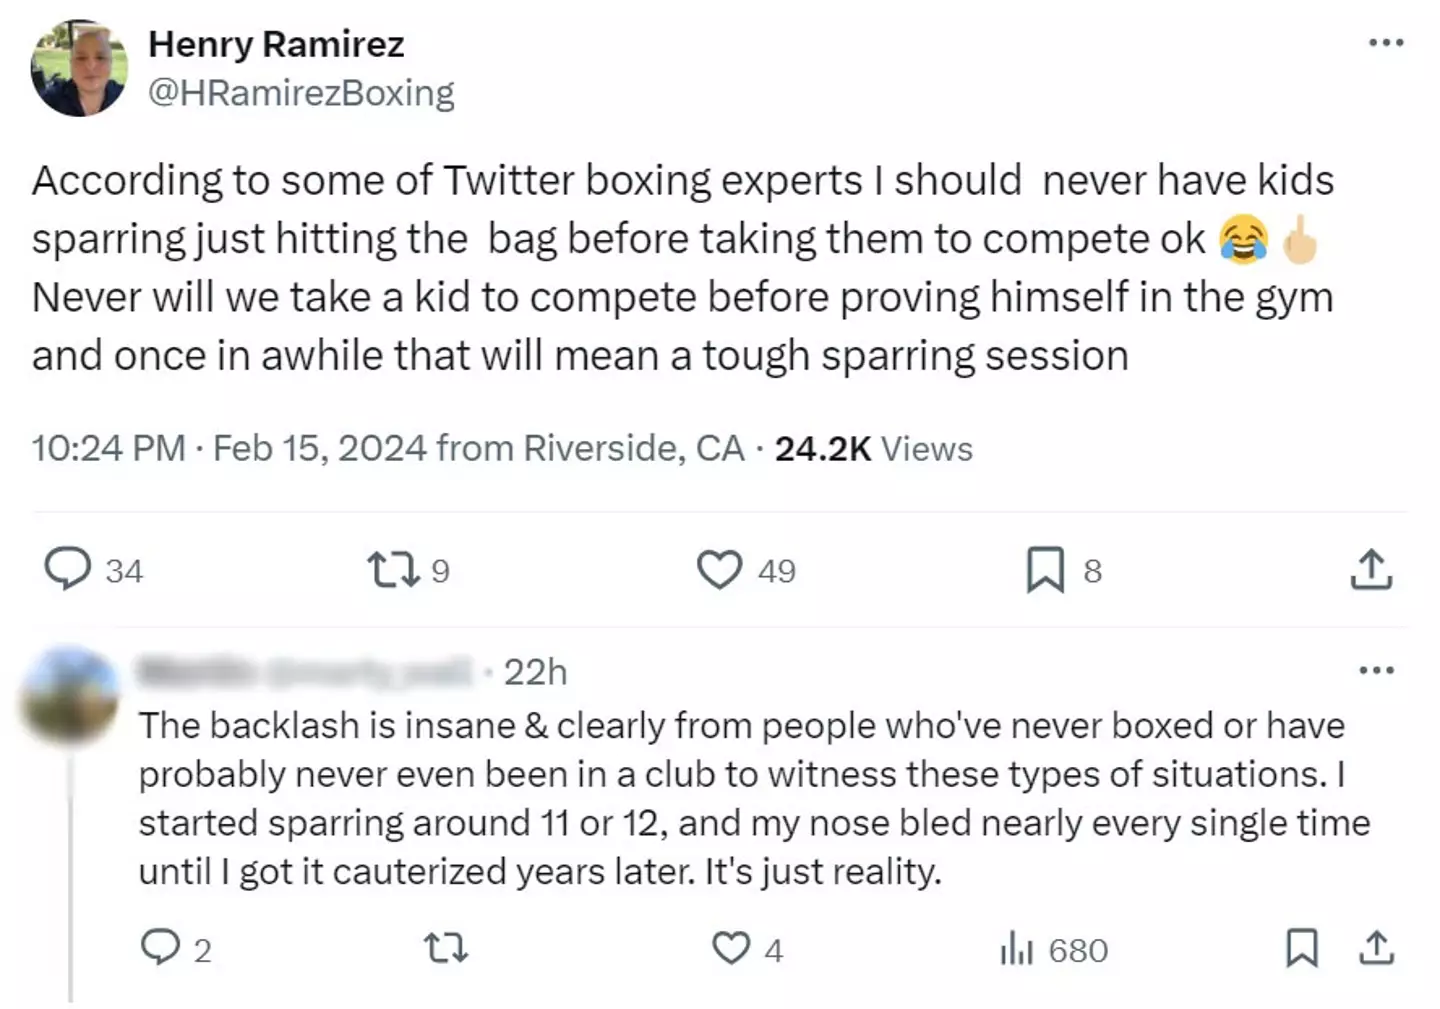 The boxing coach responded to the criticism.